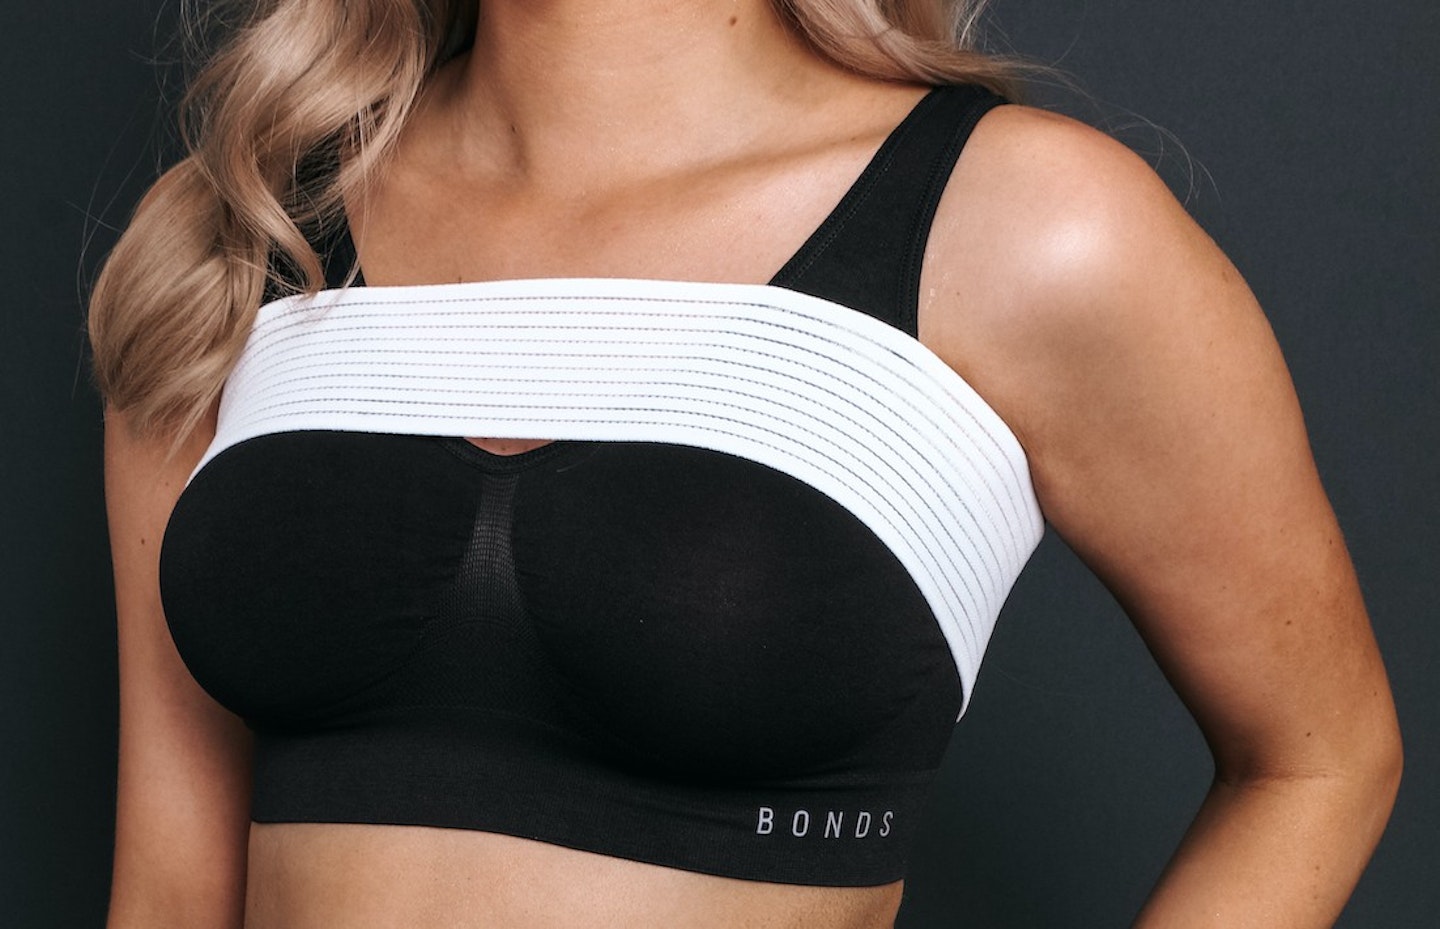 Fake boobs with a cooler and more comfortable style to wear for